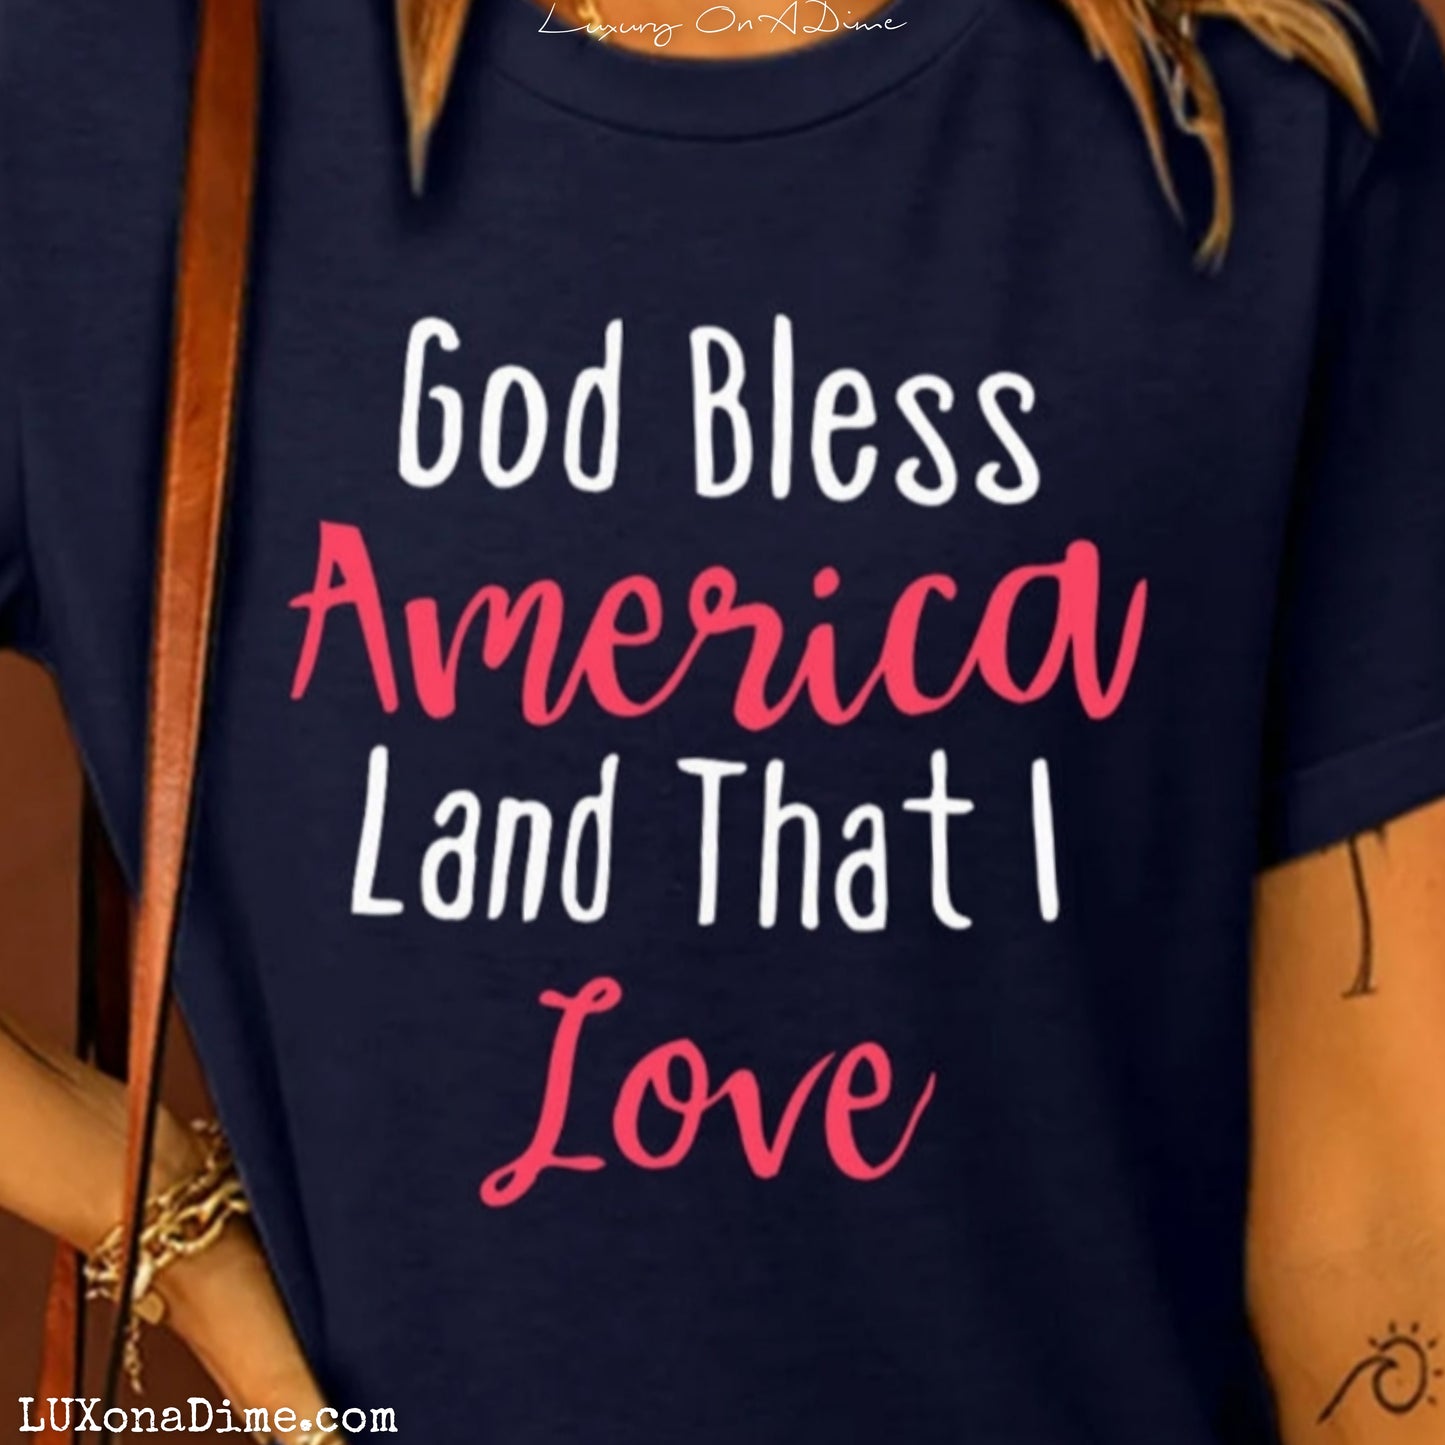 GOD BLESS AMERICA LAND THAT I LOVE Graphic Cuffed Short Sleeve Tee Shirt